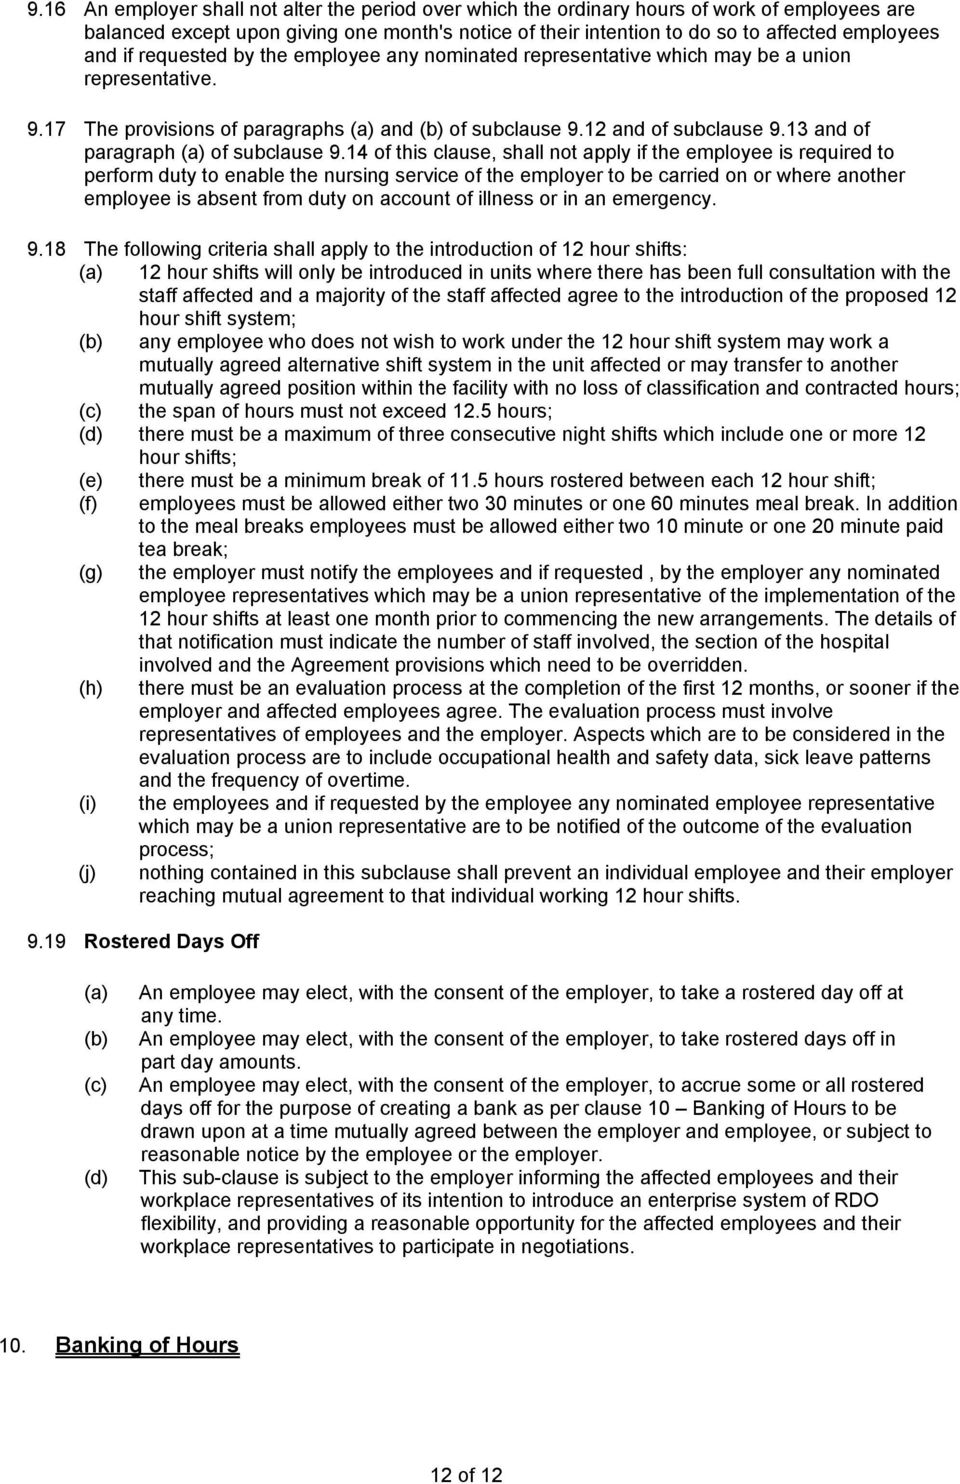 13 and of paragraph of subclause 9.